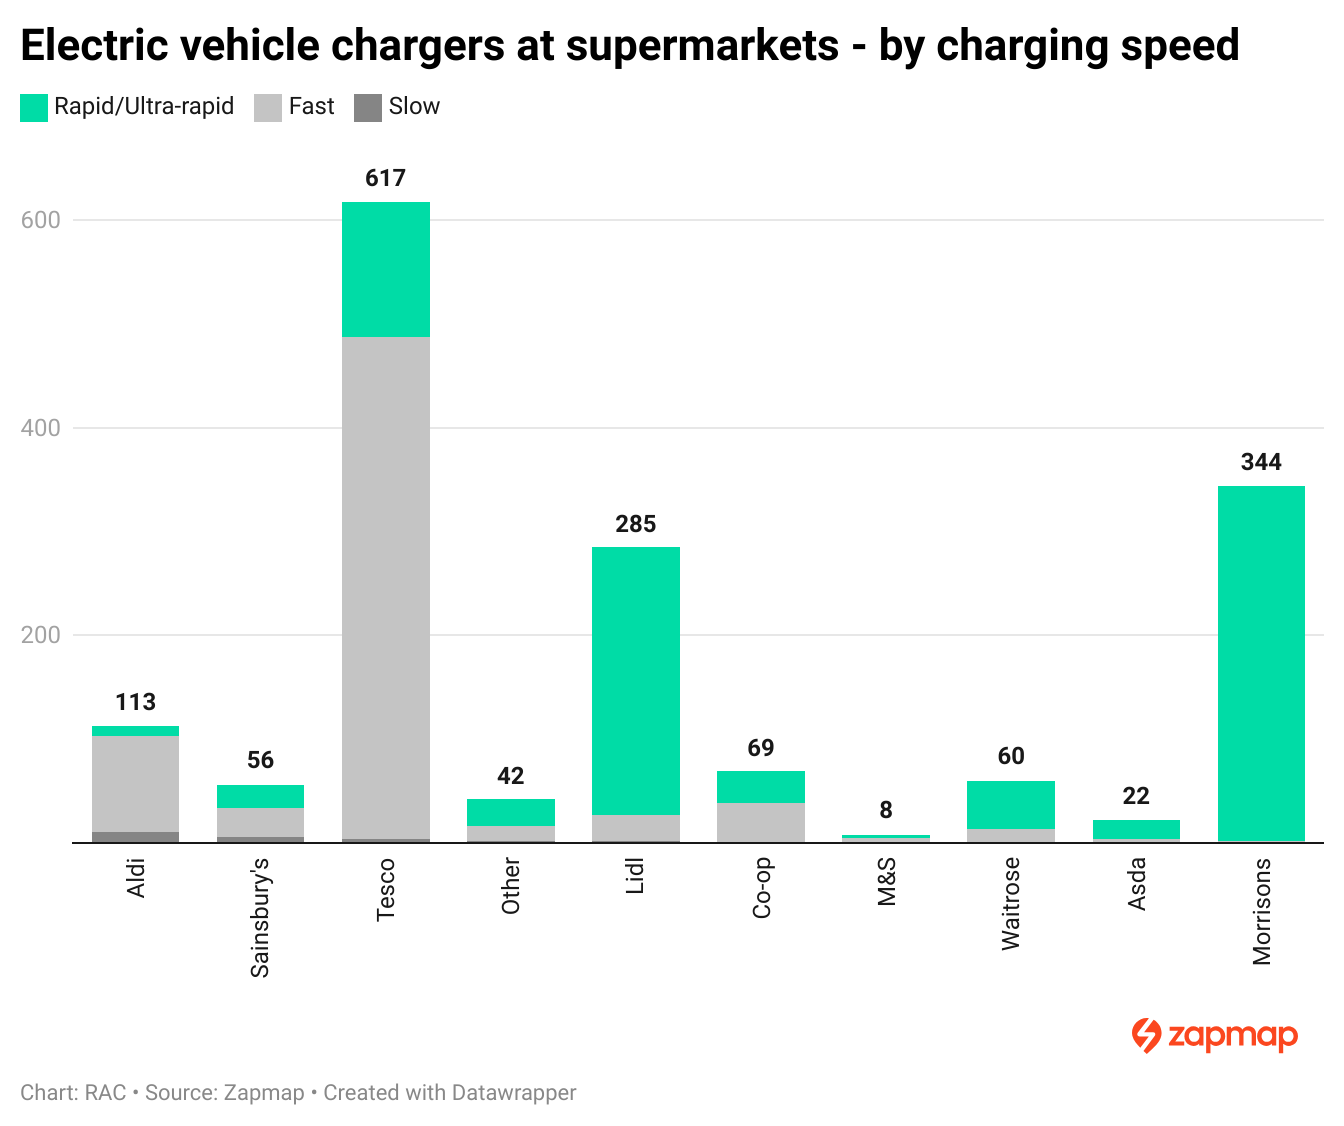 EV chargers at supermarkets by charging speed - 2023